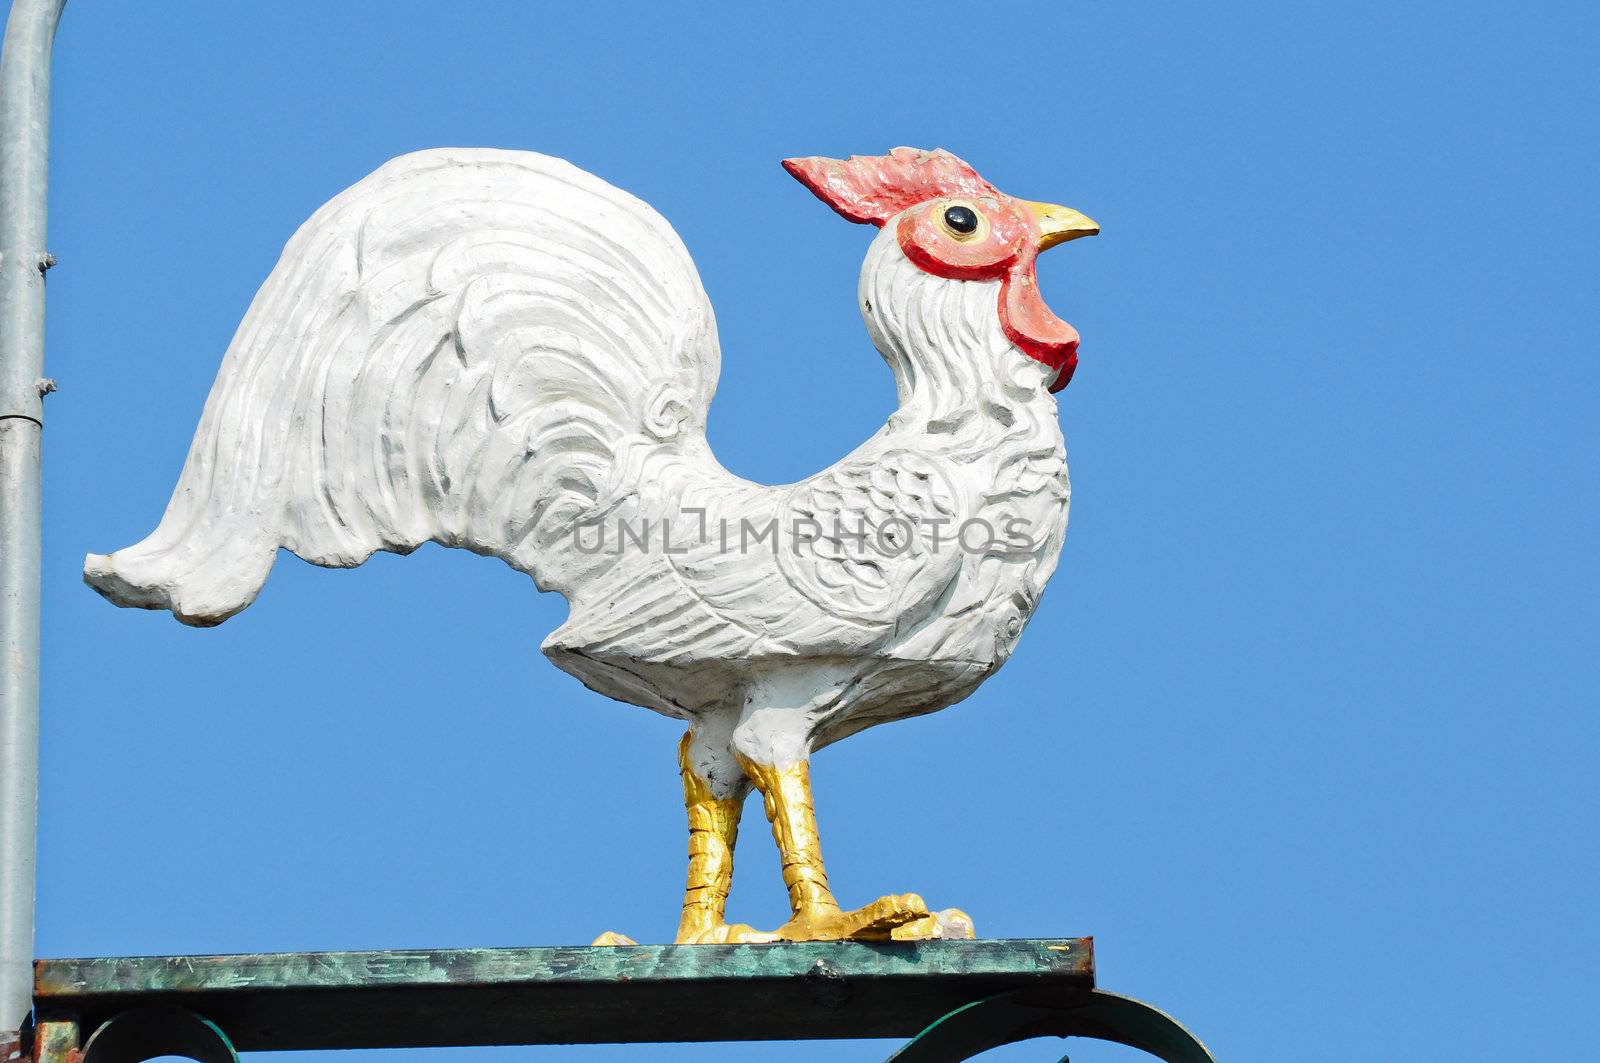 The chicken statue was decorated on the street light pole